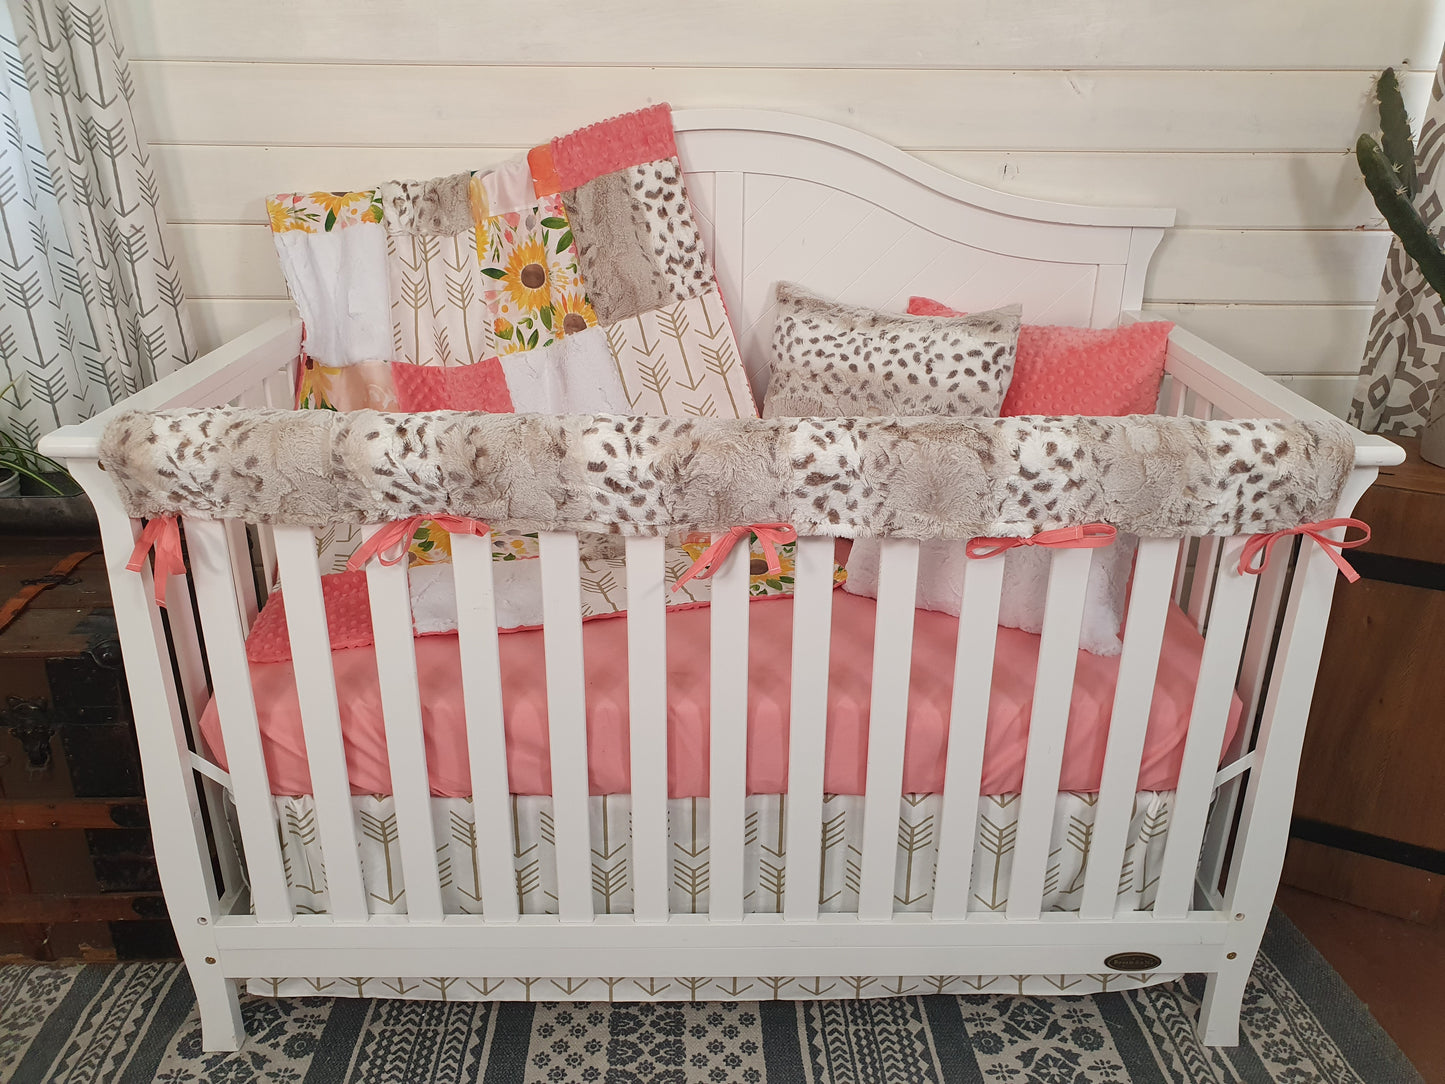 New Release Girl Crib Bedding- Sunflower and Lynx Minky Floral Baby Bedding & Nursery Collection - DBC Baby Bedding Co 